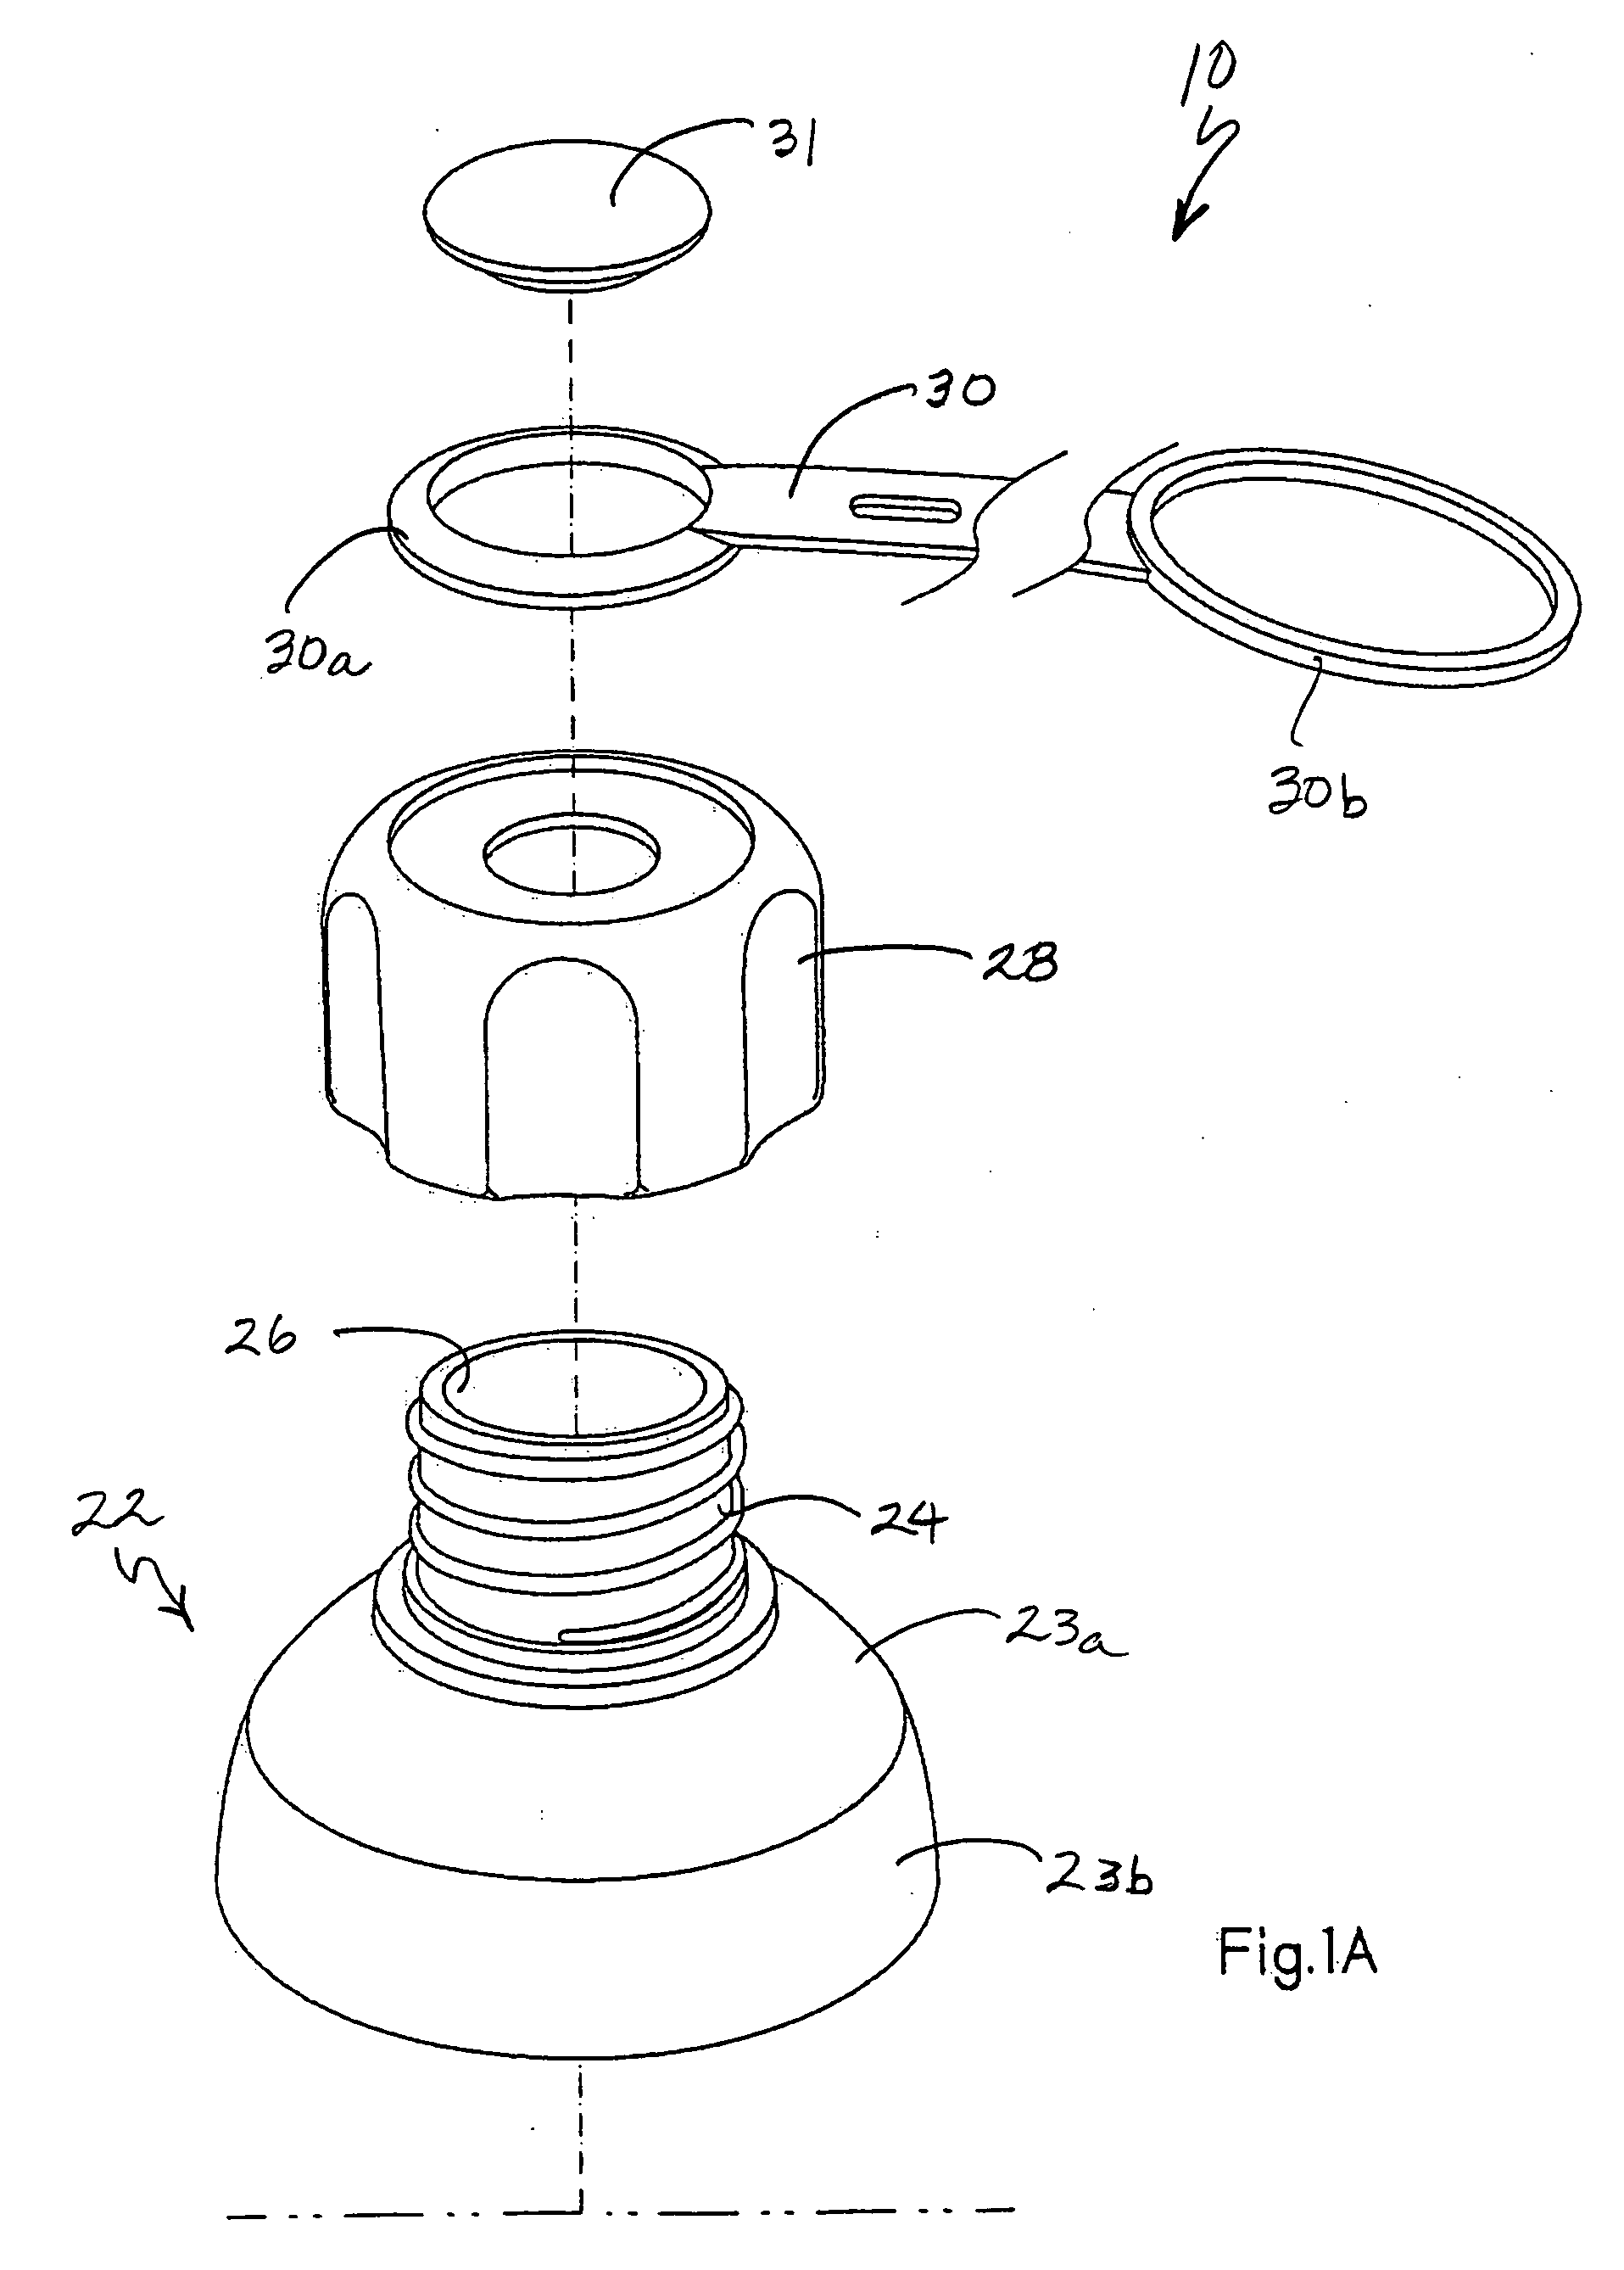 Bottle assembly with removable container assembly